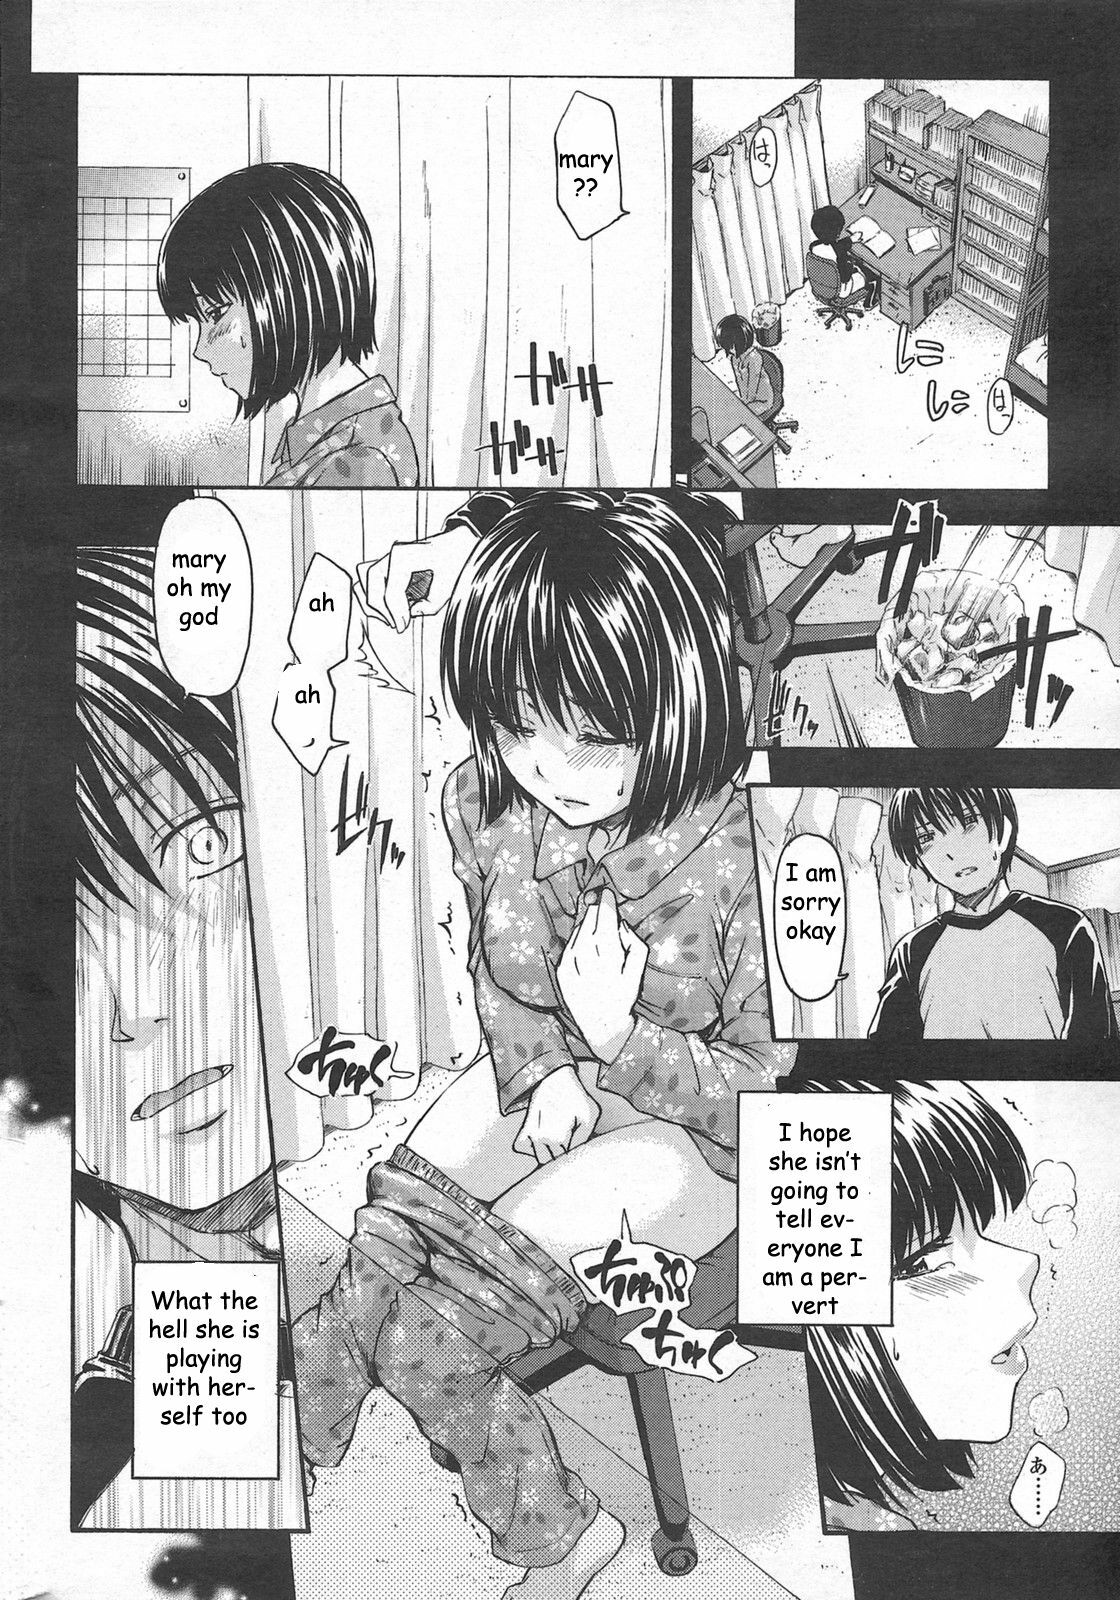 Reluctant Brother [English] [Rewrite] [EZ Rewriter] page 2 full